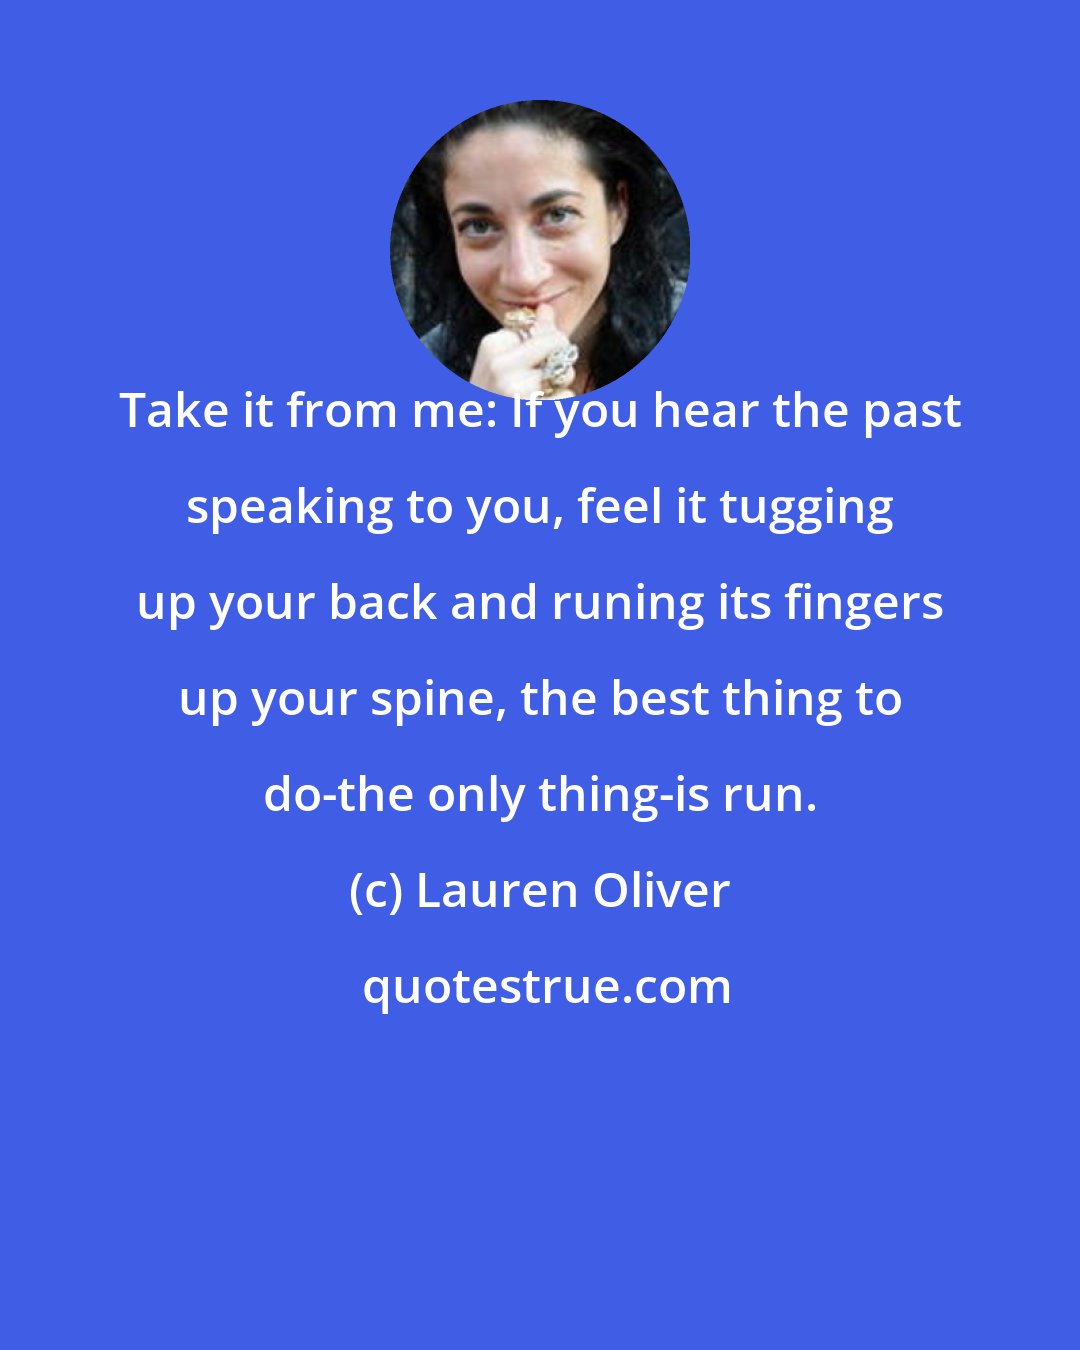 Lauren Oliver: Take it from me: If you hear the past speaking to you, feel it tugging up your back and runing its fingers up your spine, the best thing to do-the only thing-is run.